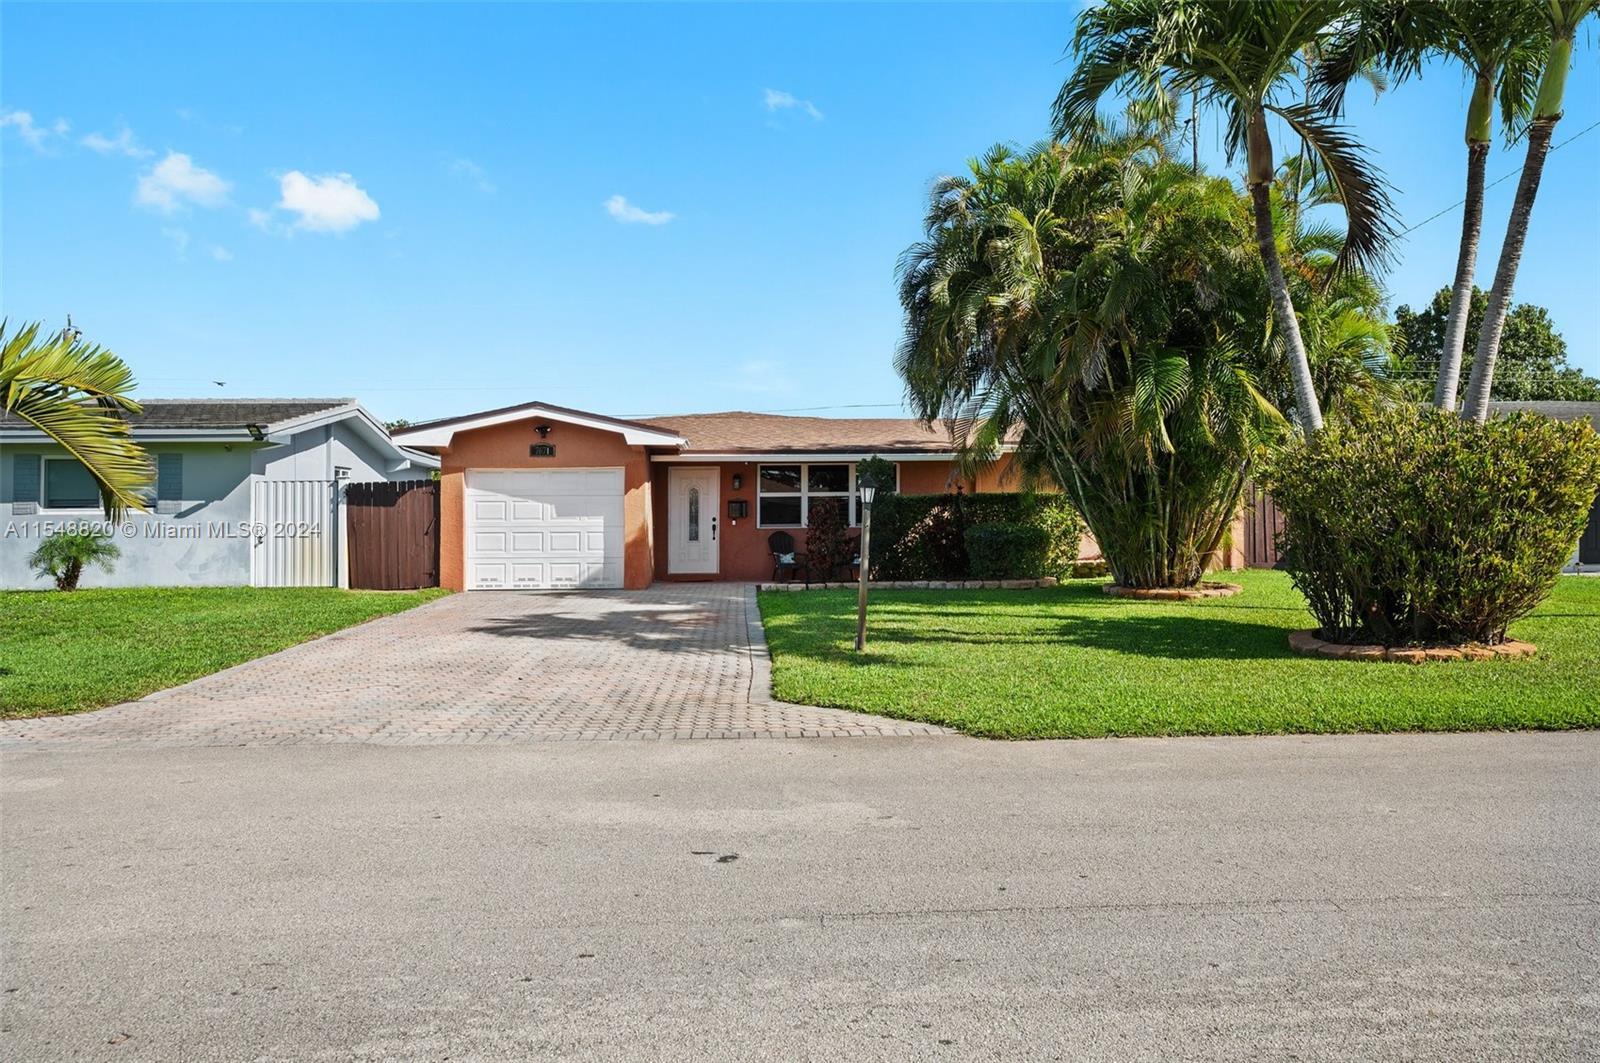 Photo of 7671 NW 15th Ct in Pembroke Pines, FL